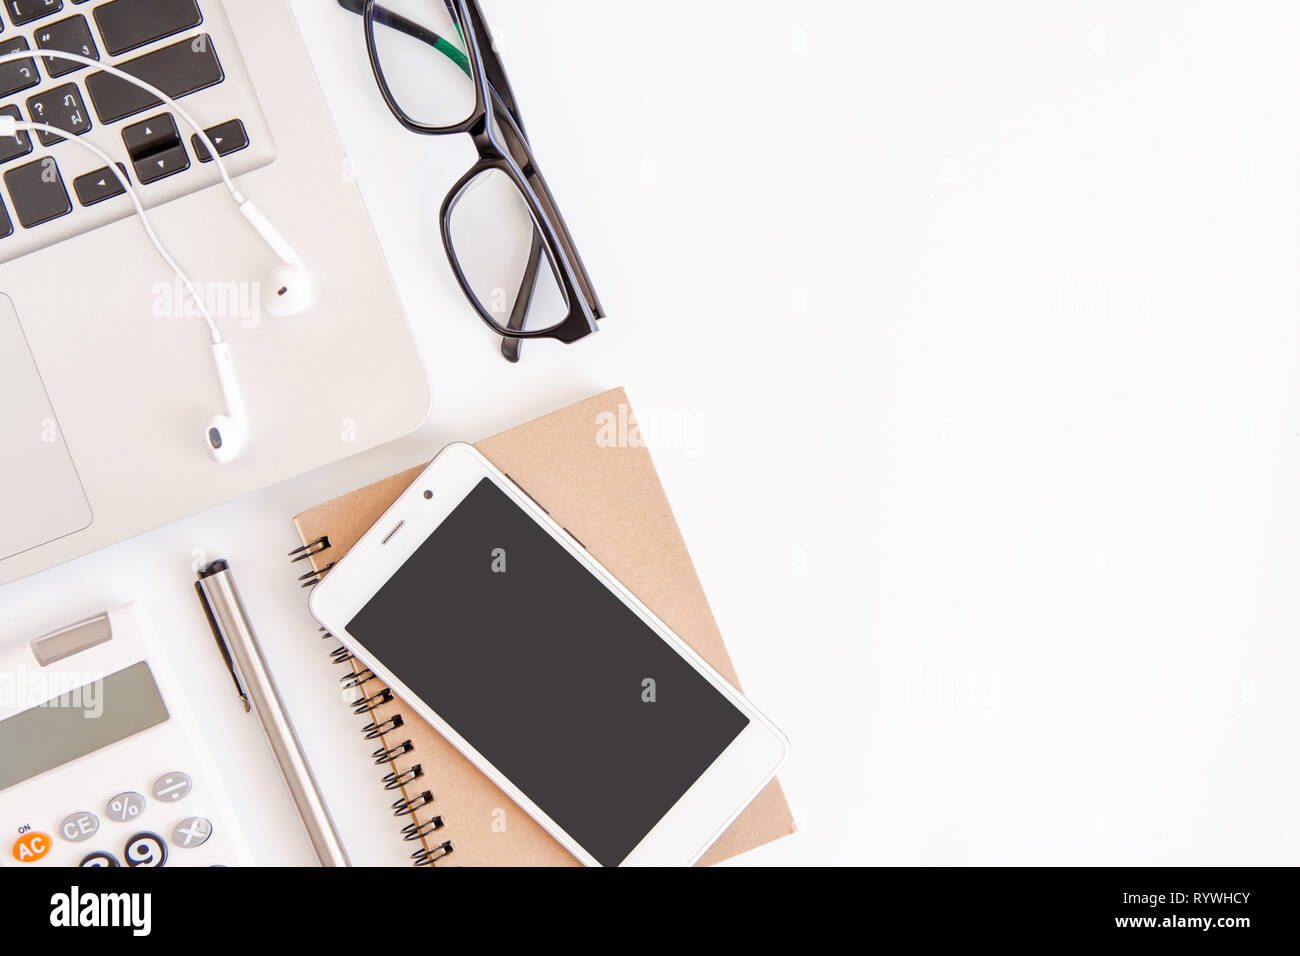 White office desk table, workspace office with laptop, smartphone black screen,pen,calculator, glasses, Top view with copy space Stock Photo